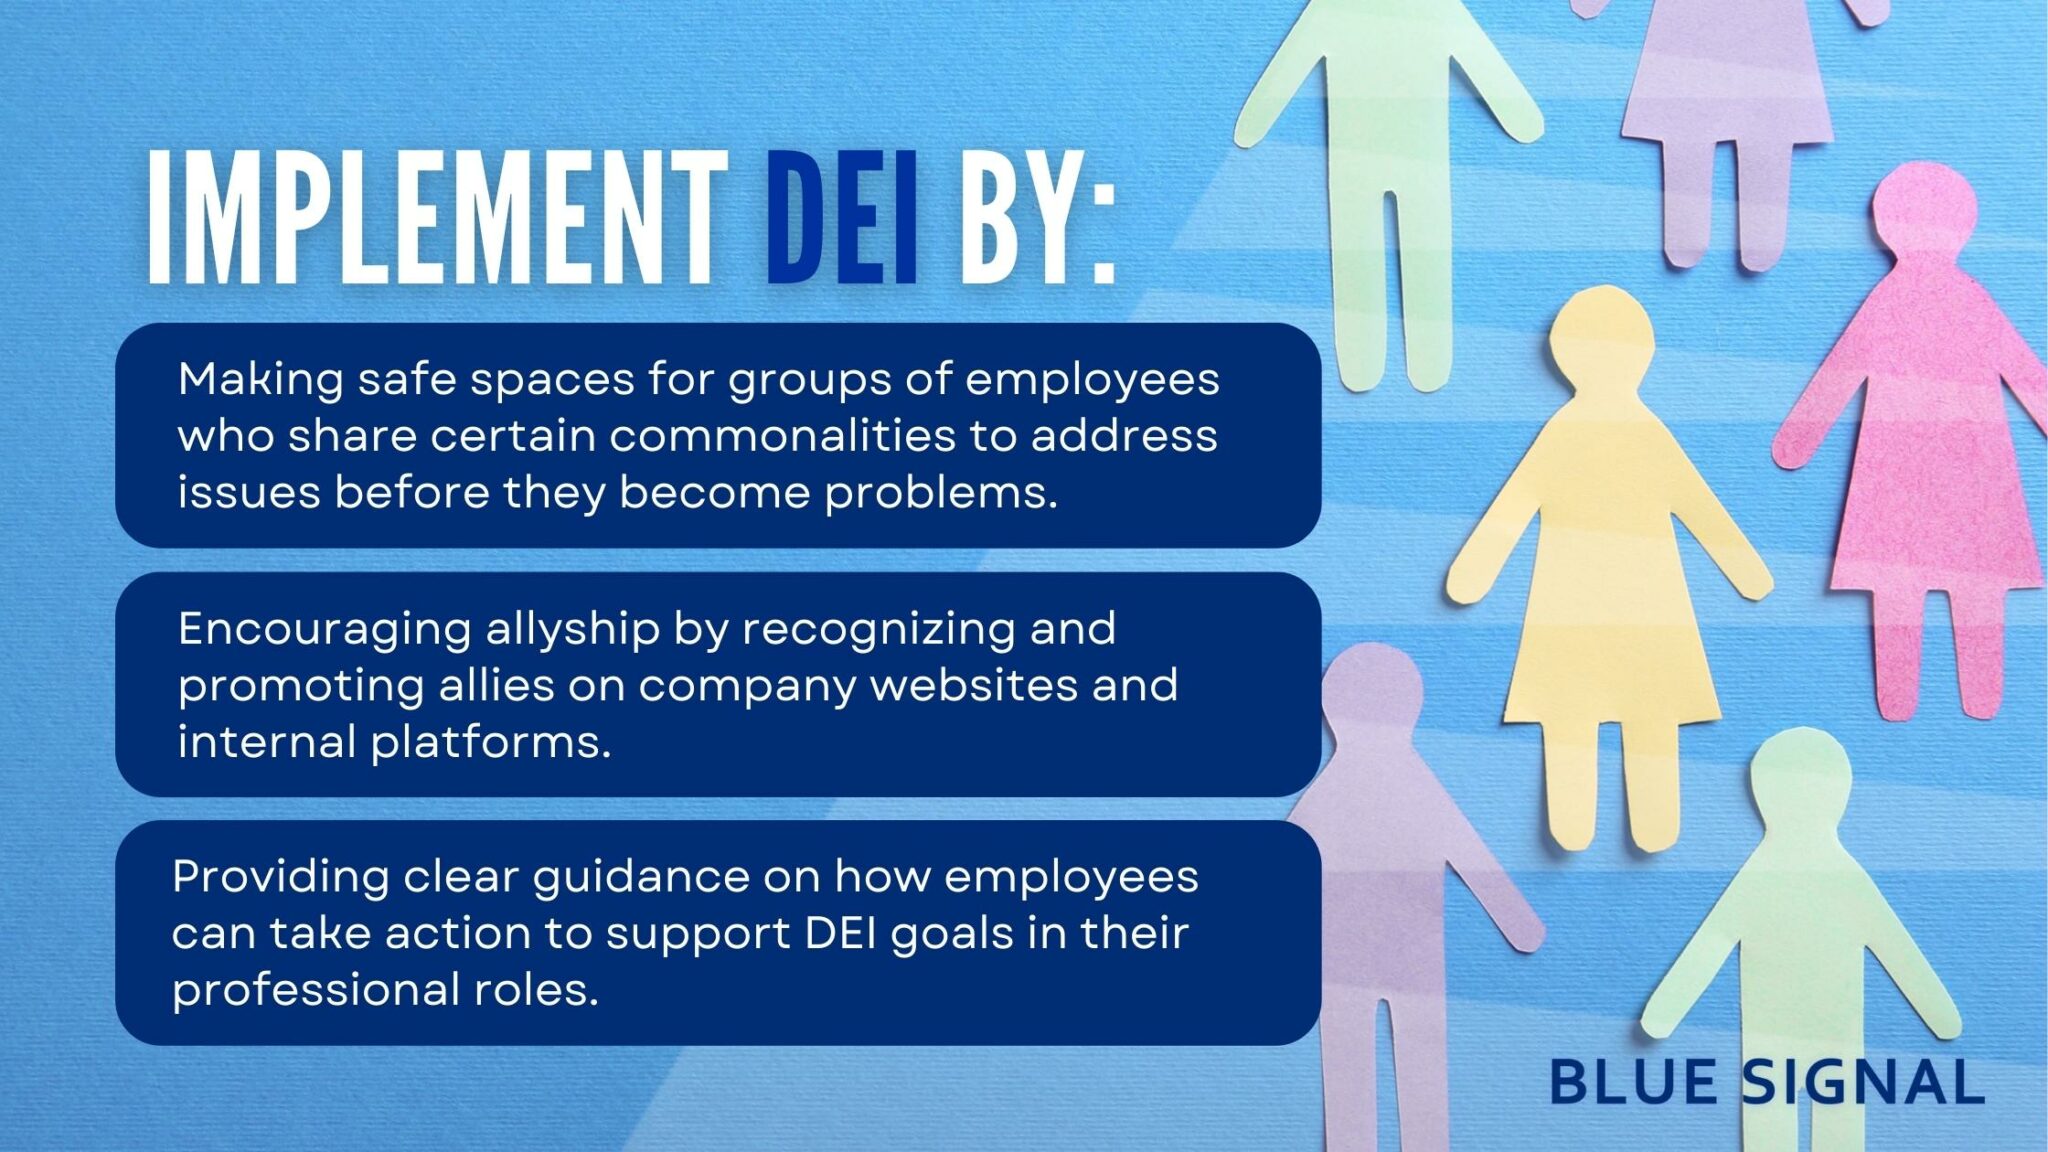 A chart showing 3 ways to implement DEI efforts into your company culture.